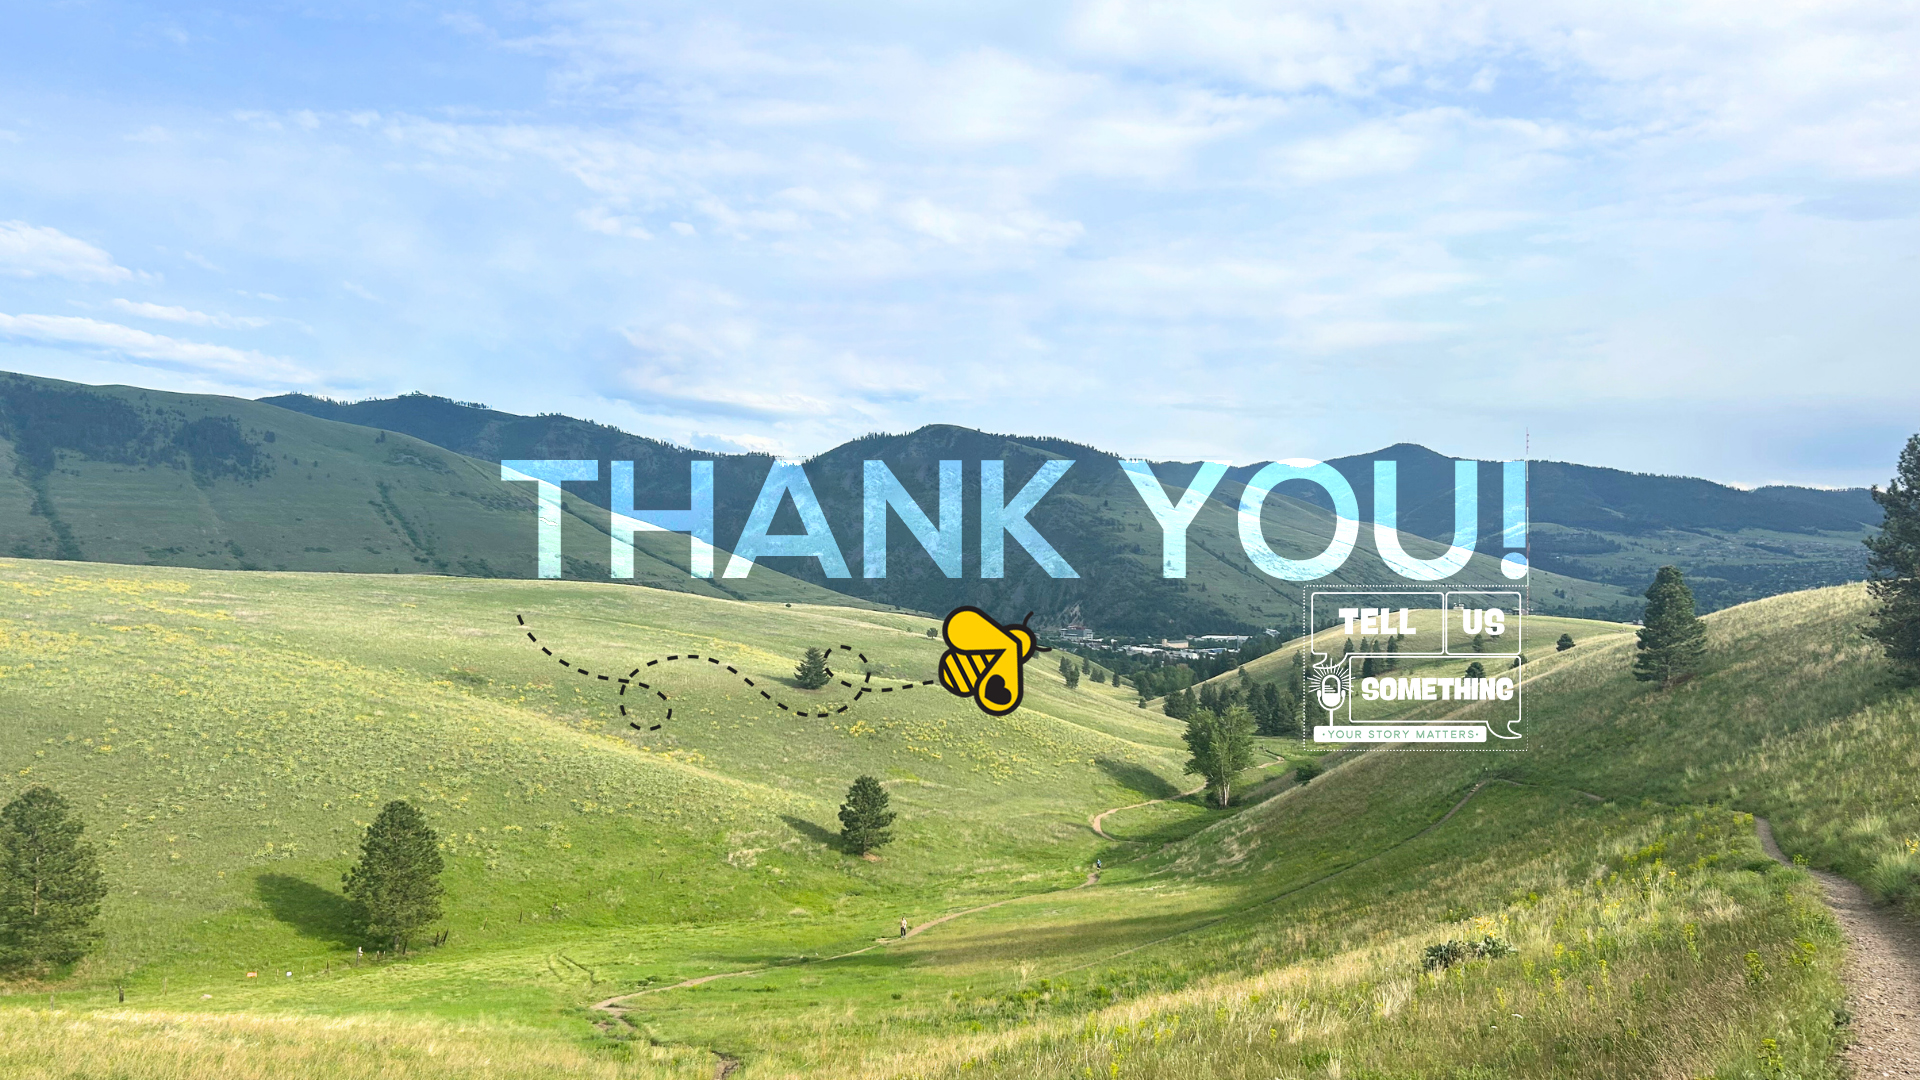 The image features text that reads "THANK YOU! TELL US SOMETHING. YOUR STORY MATTERS." The setting includes outdoor elements like grass, sky, clouds, trees, plants, mountains, and hills, creating a natural landscape backdrop. There is a graphic of a flying bee.